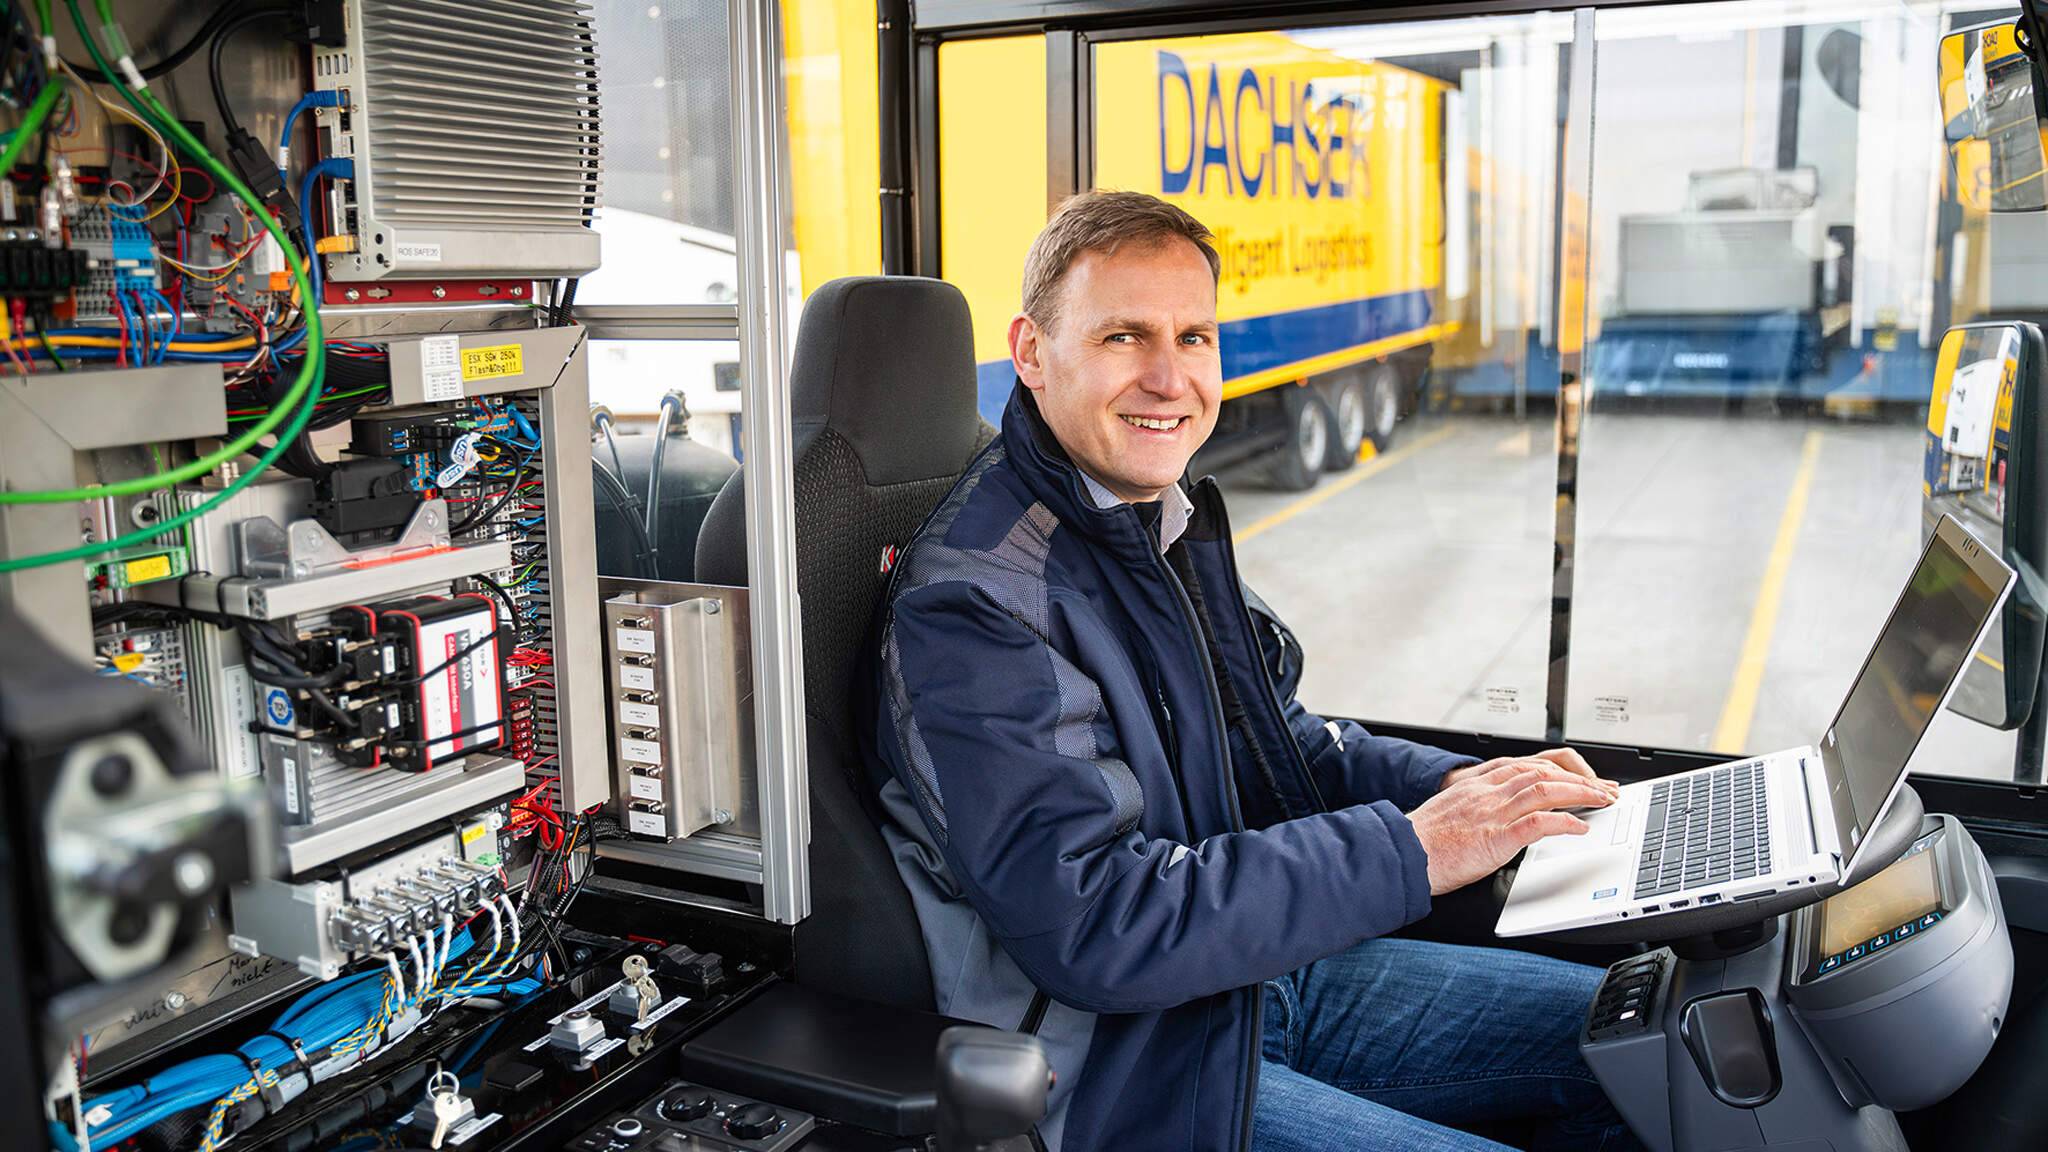 On the go in a real lab: André Bilz carries out vehicle programming